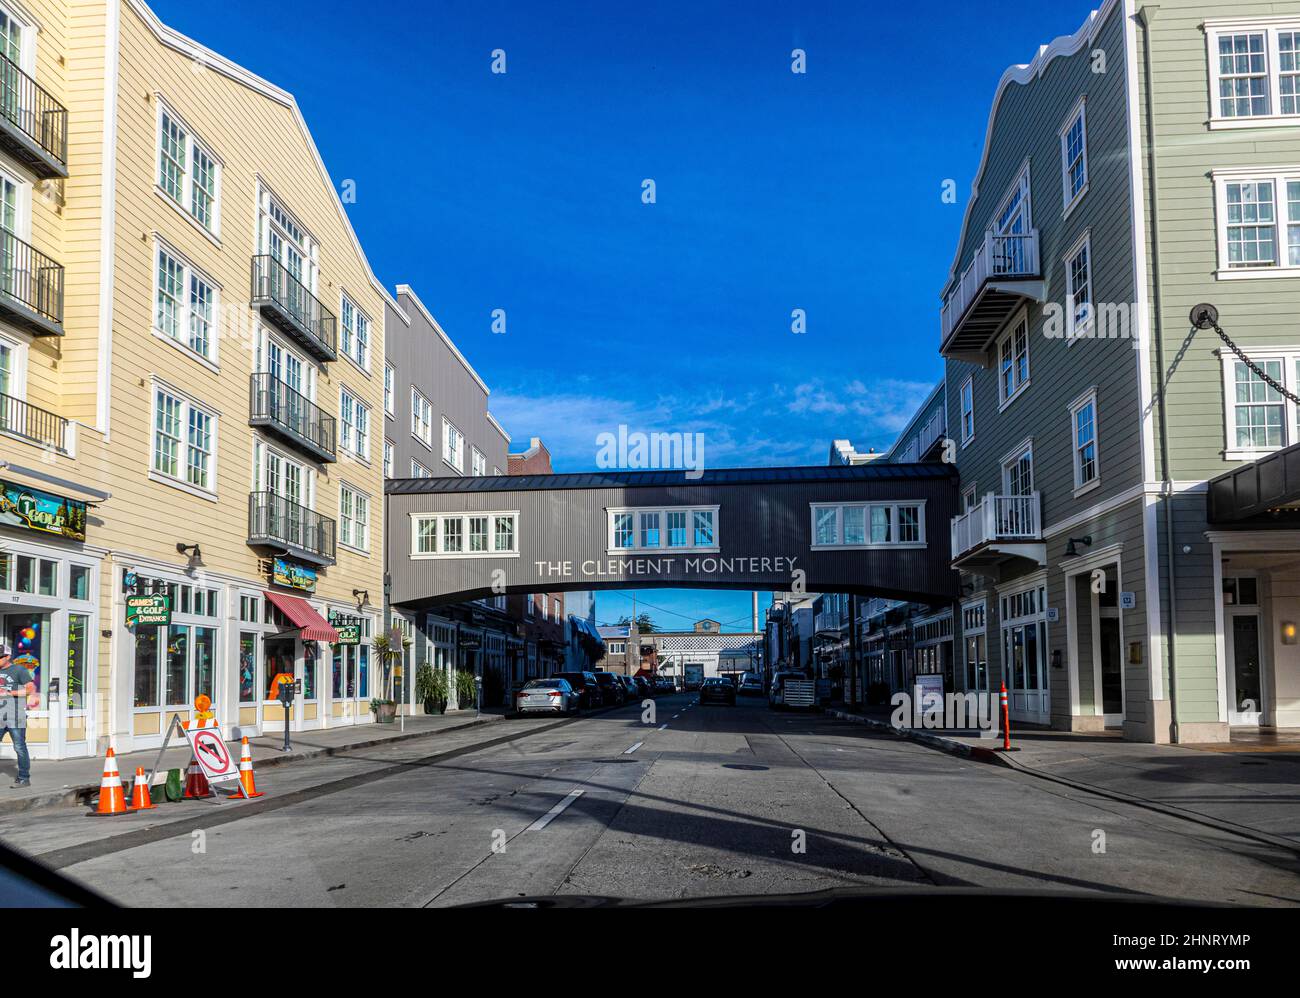 Monterey has attracted artists since the late 19th century and many celebrated painters and writers have lived there. It is now a major cruise ship destination. Stock Photo